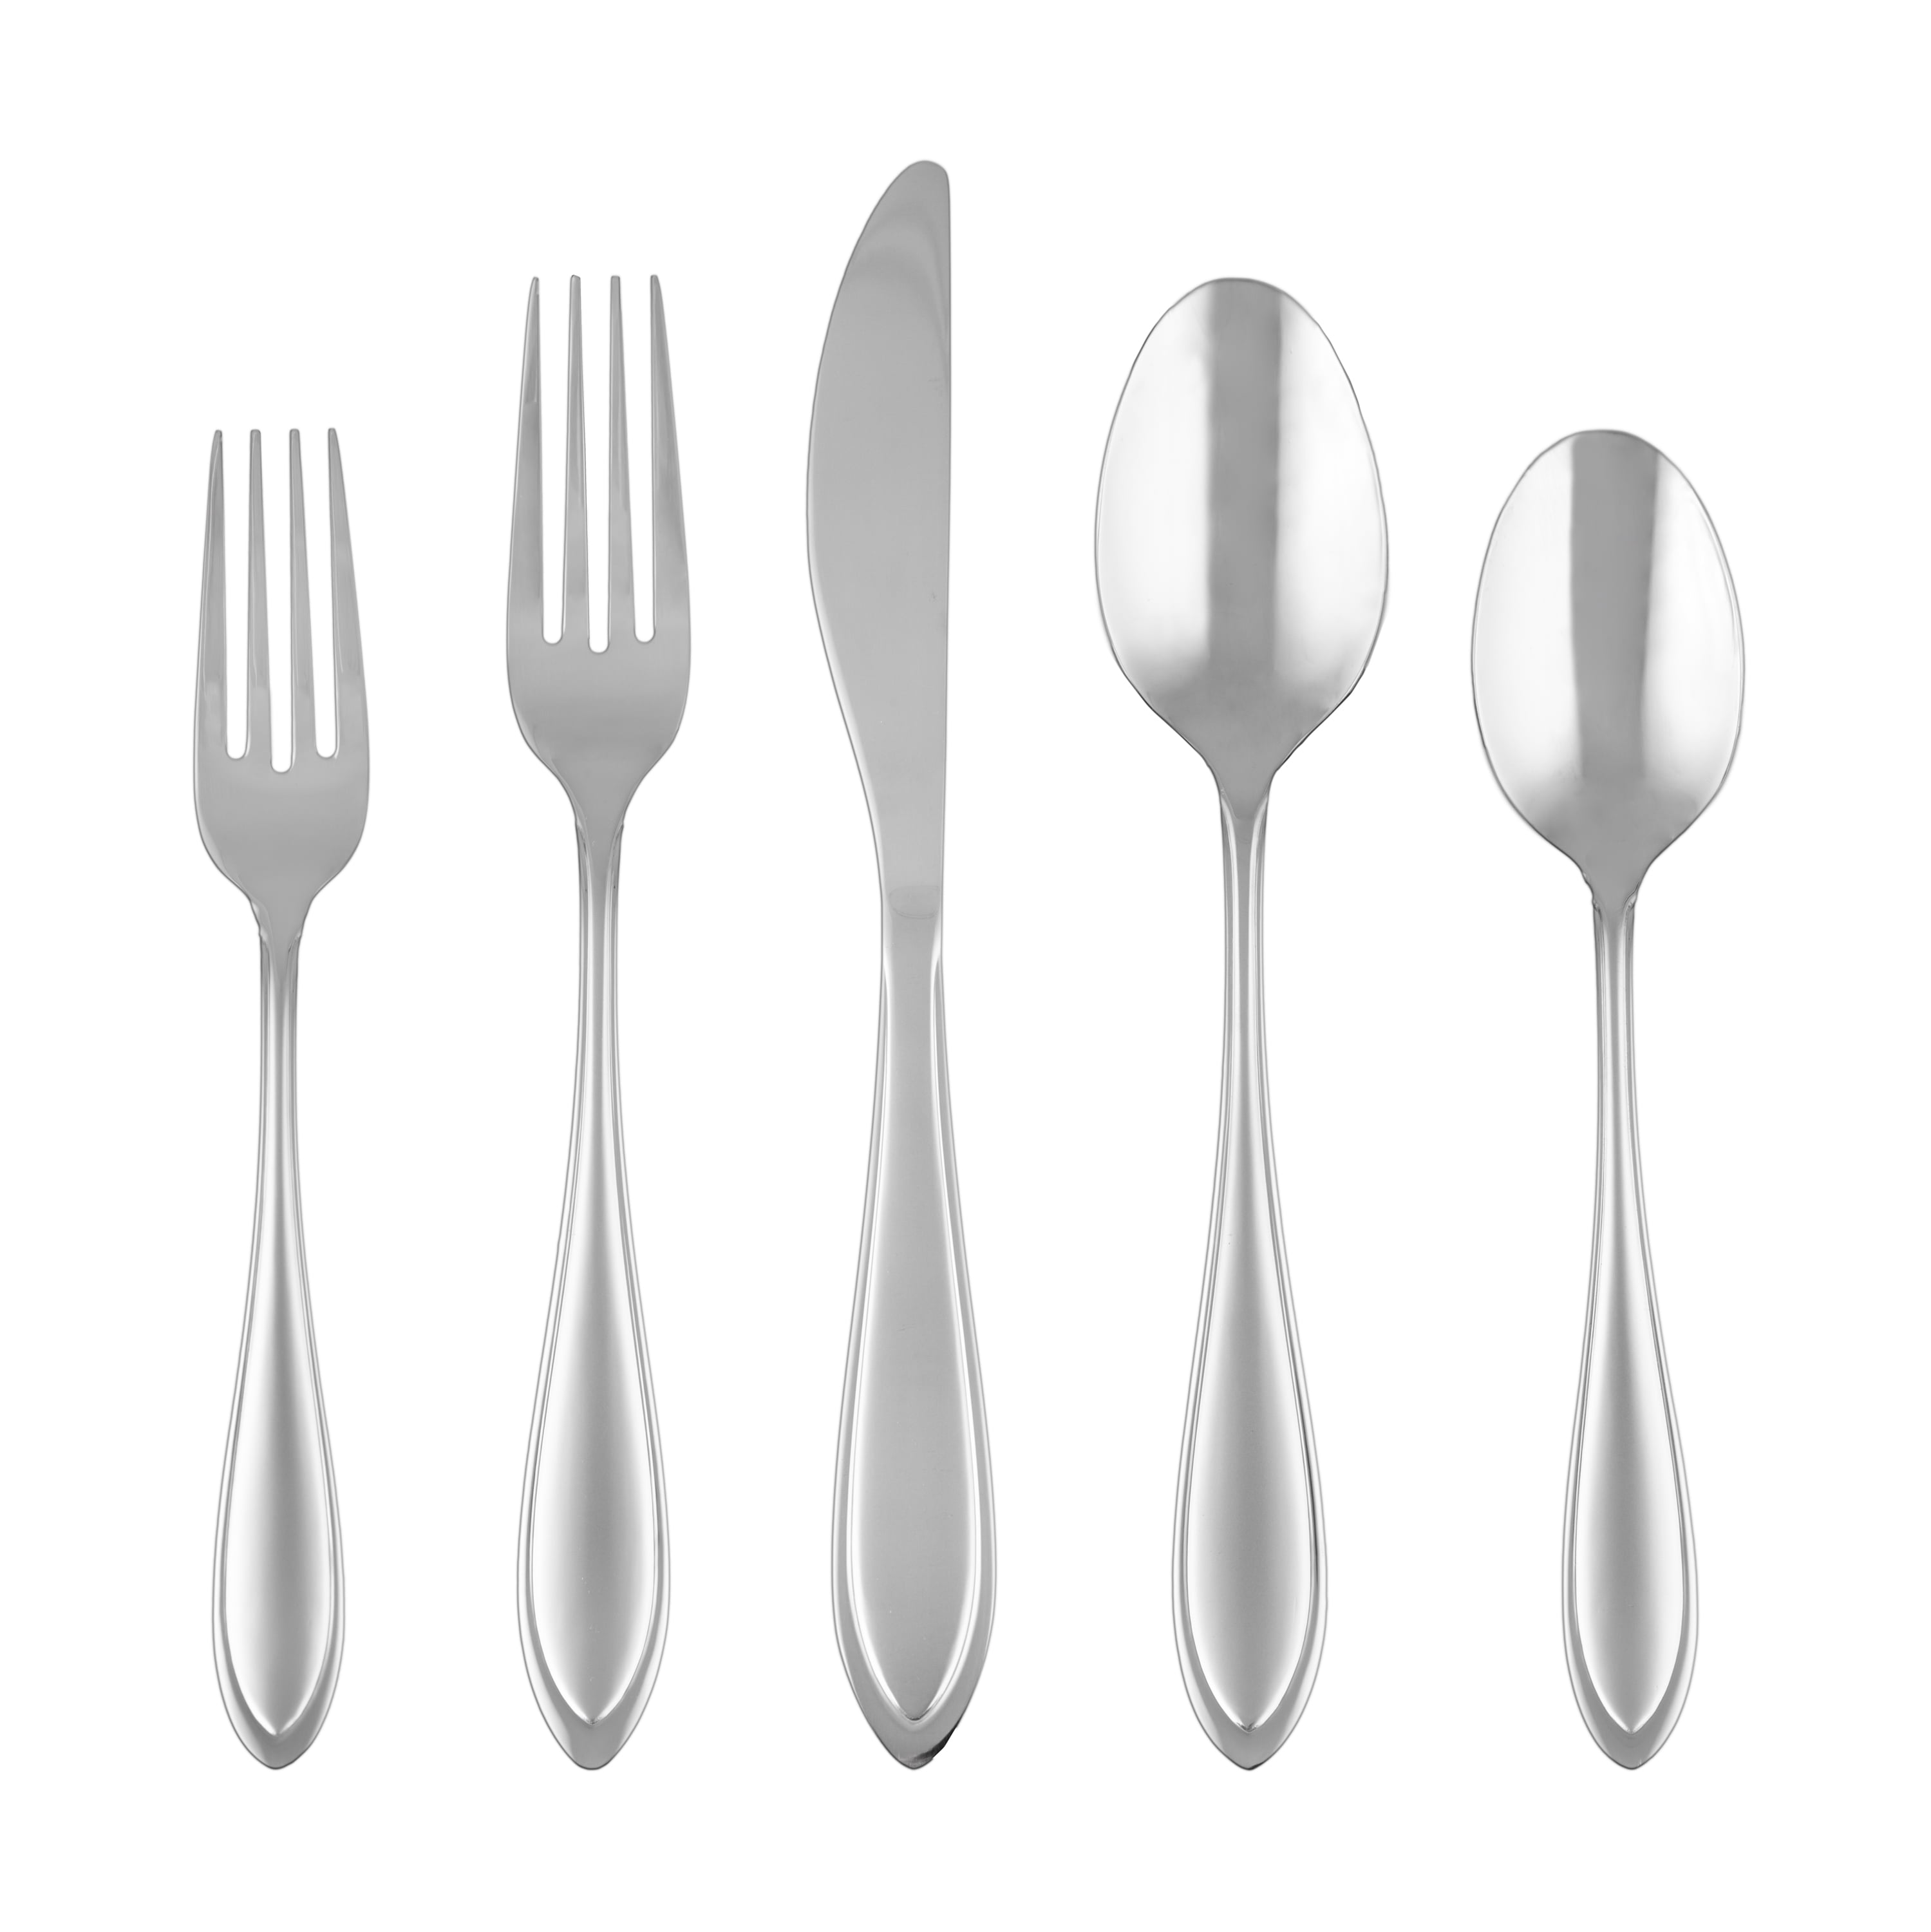 New Gorham Ribbon Edge Frosted Stainless 5 Piece Place Setting Flatware NIB 